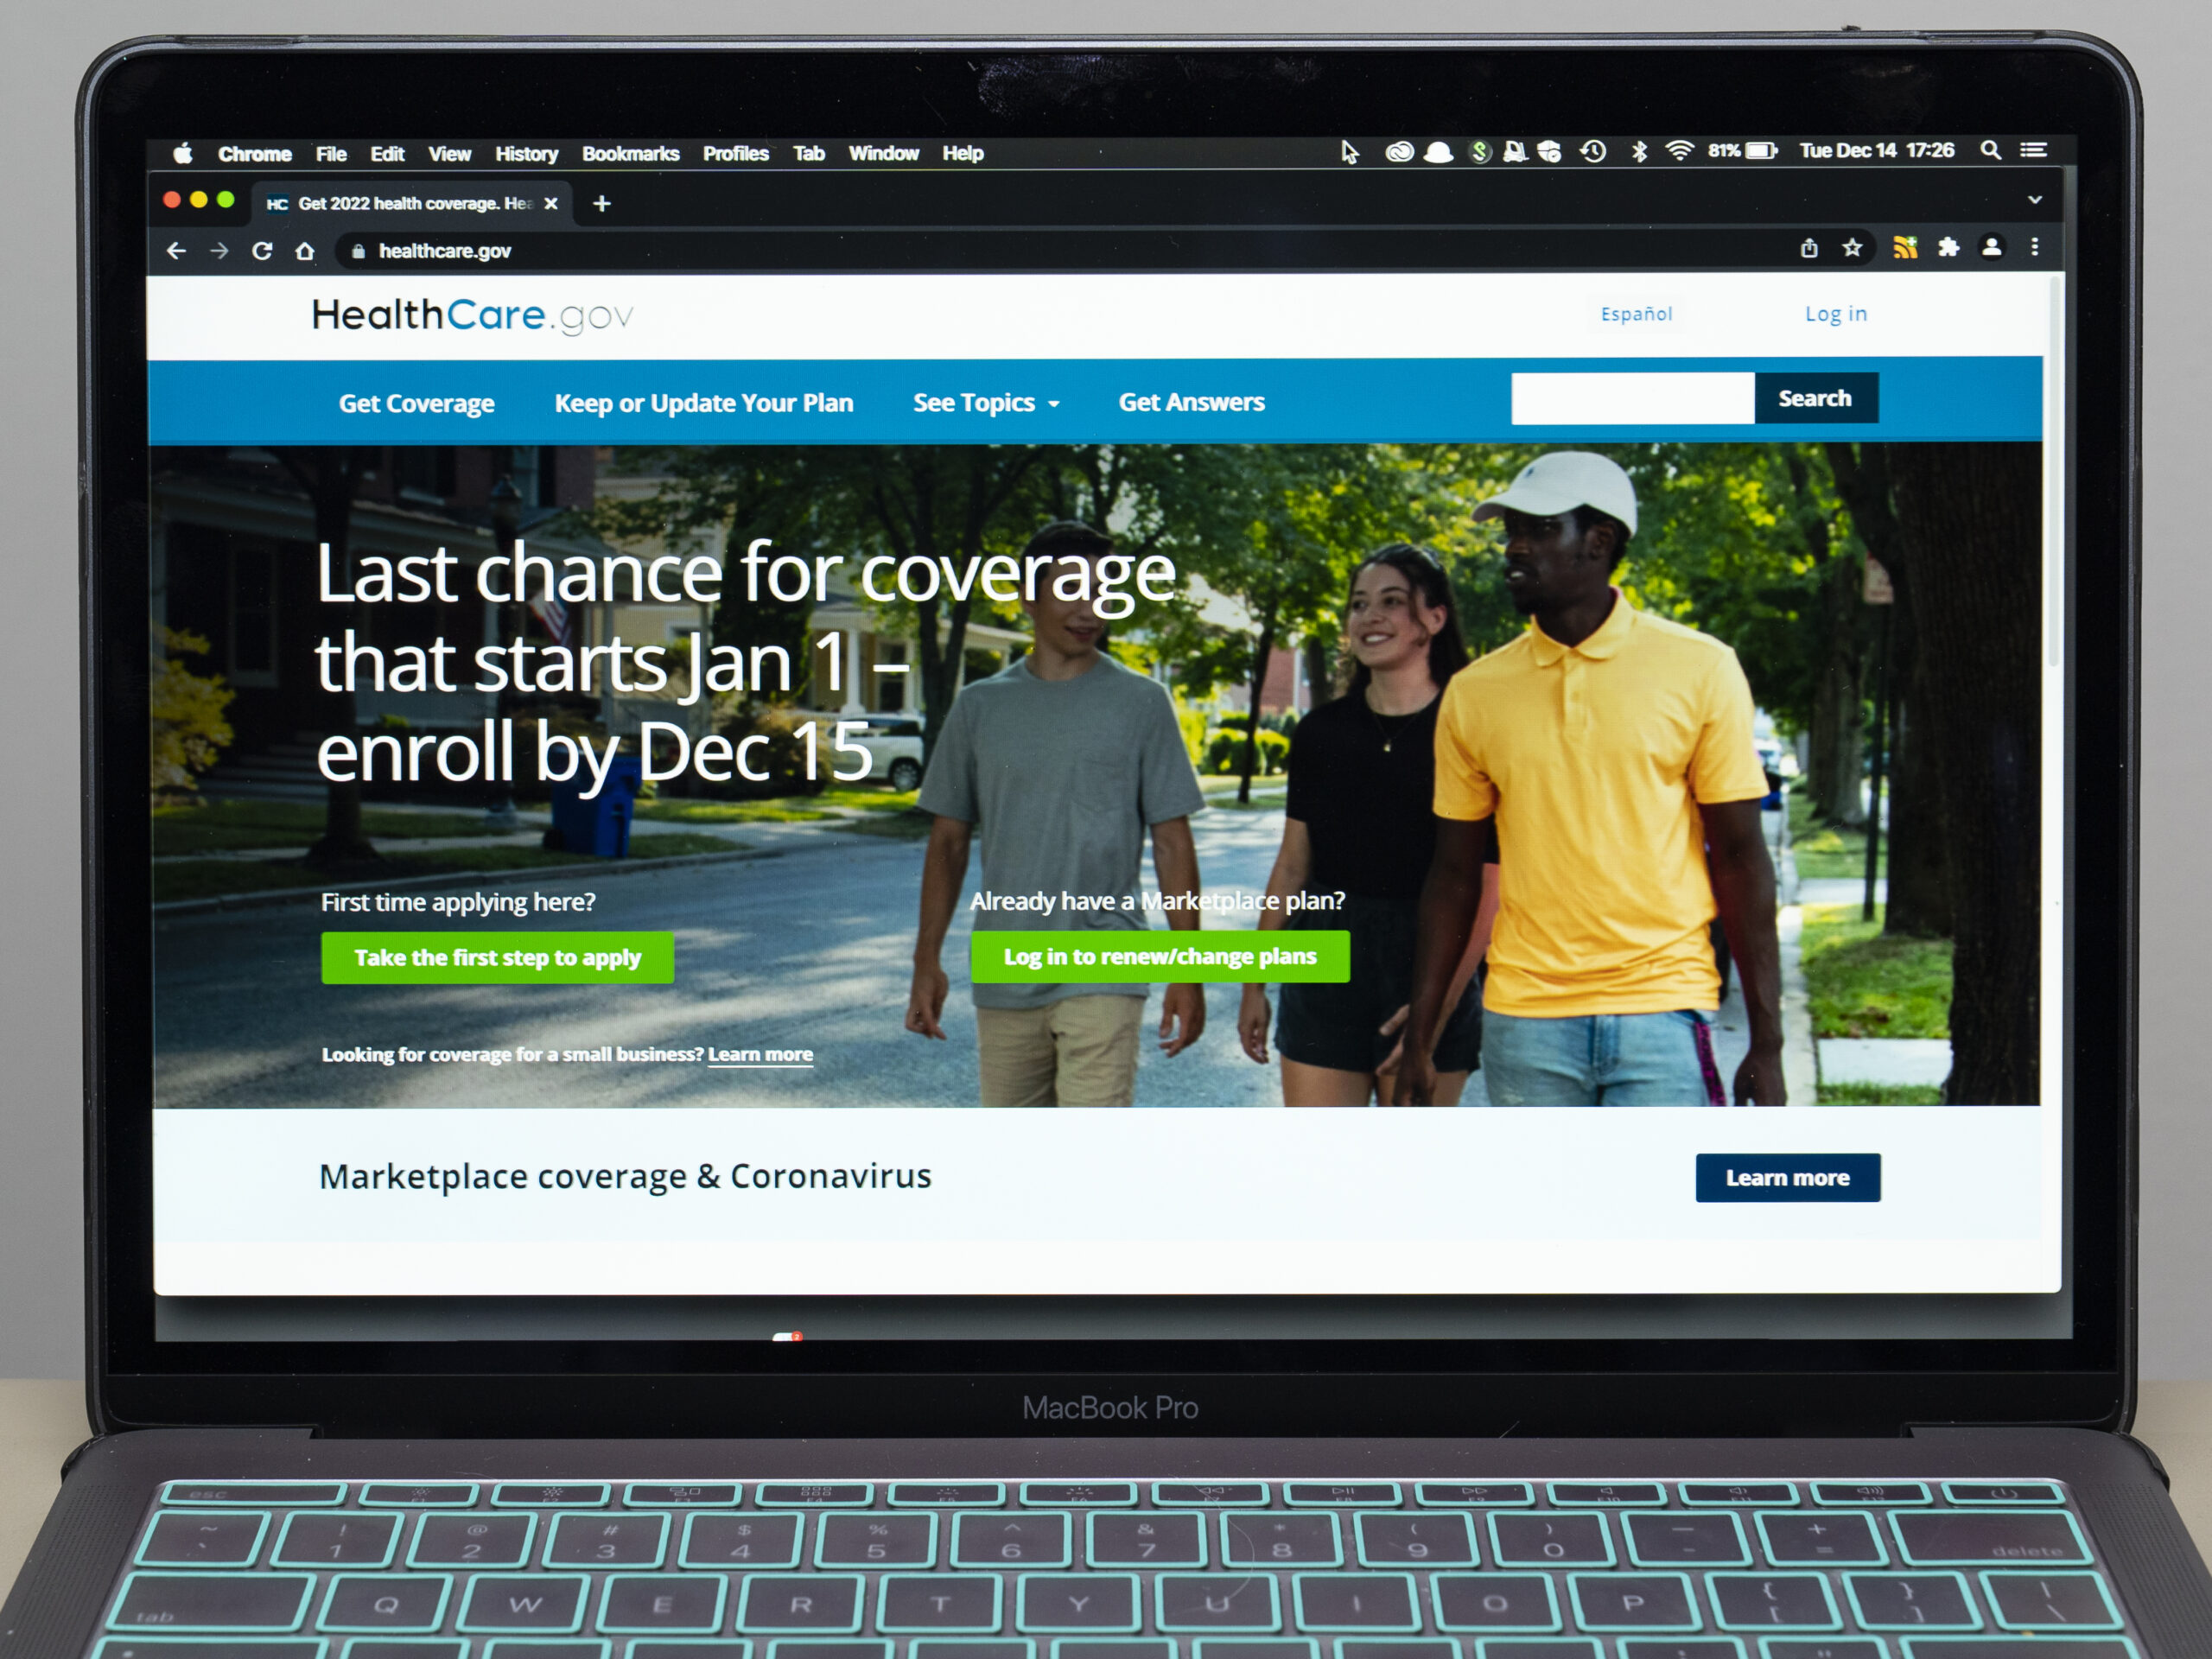 Unauthorized ACA plan switches drive call for action against rogue agents